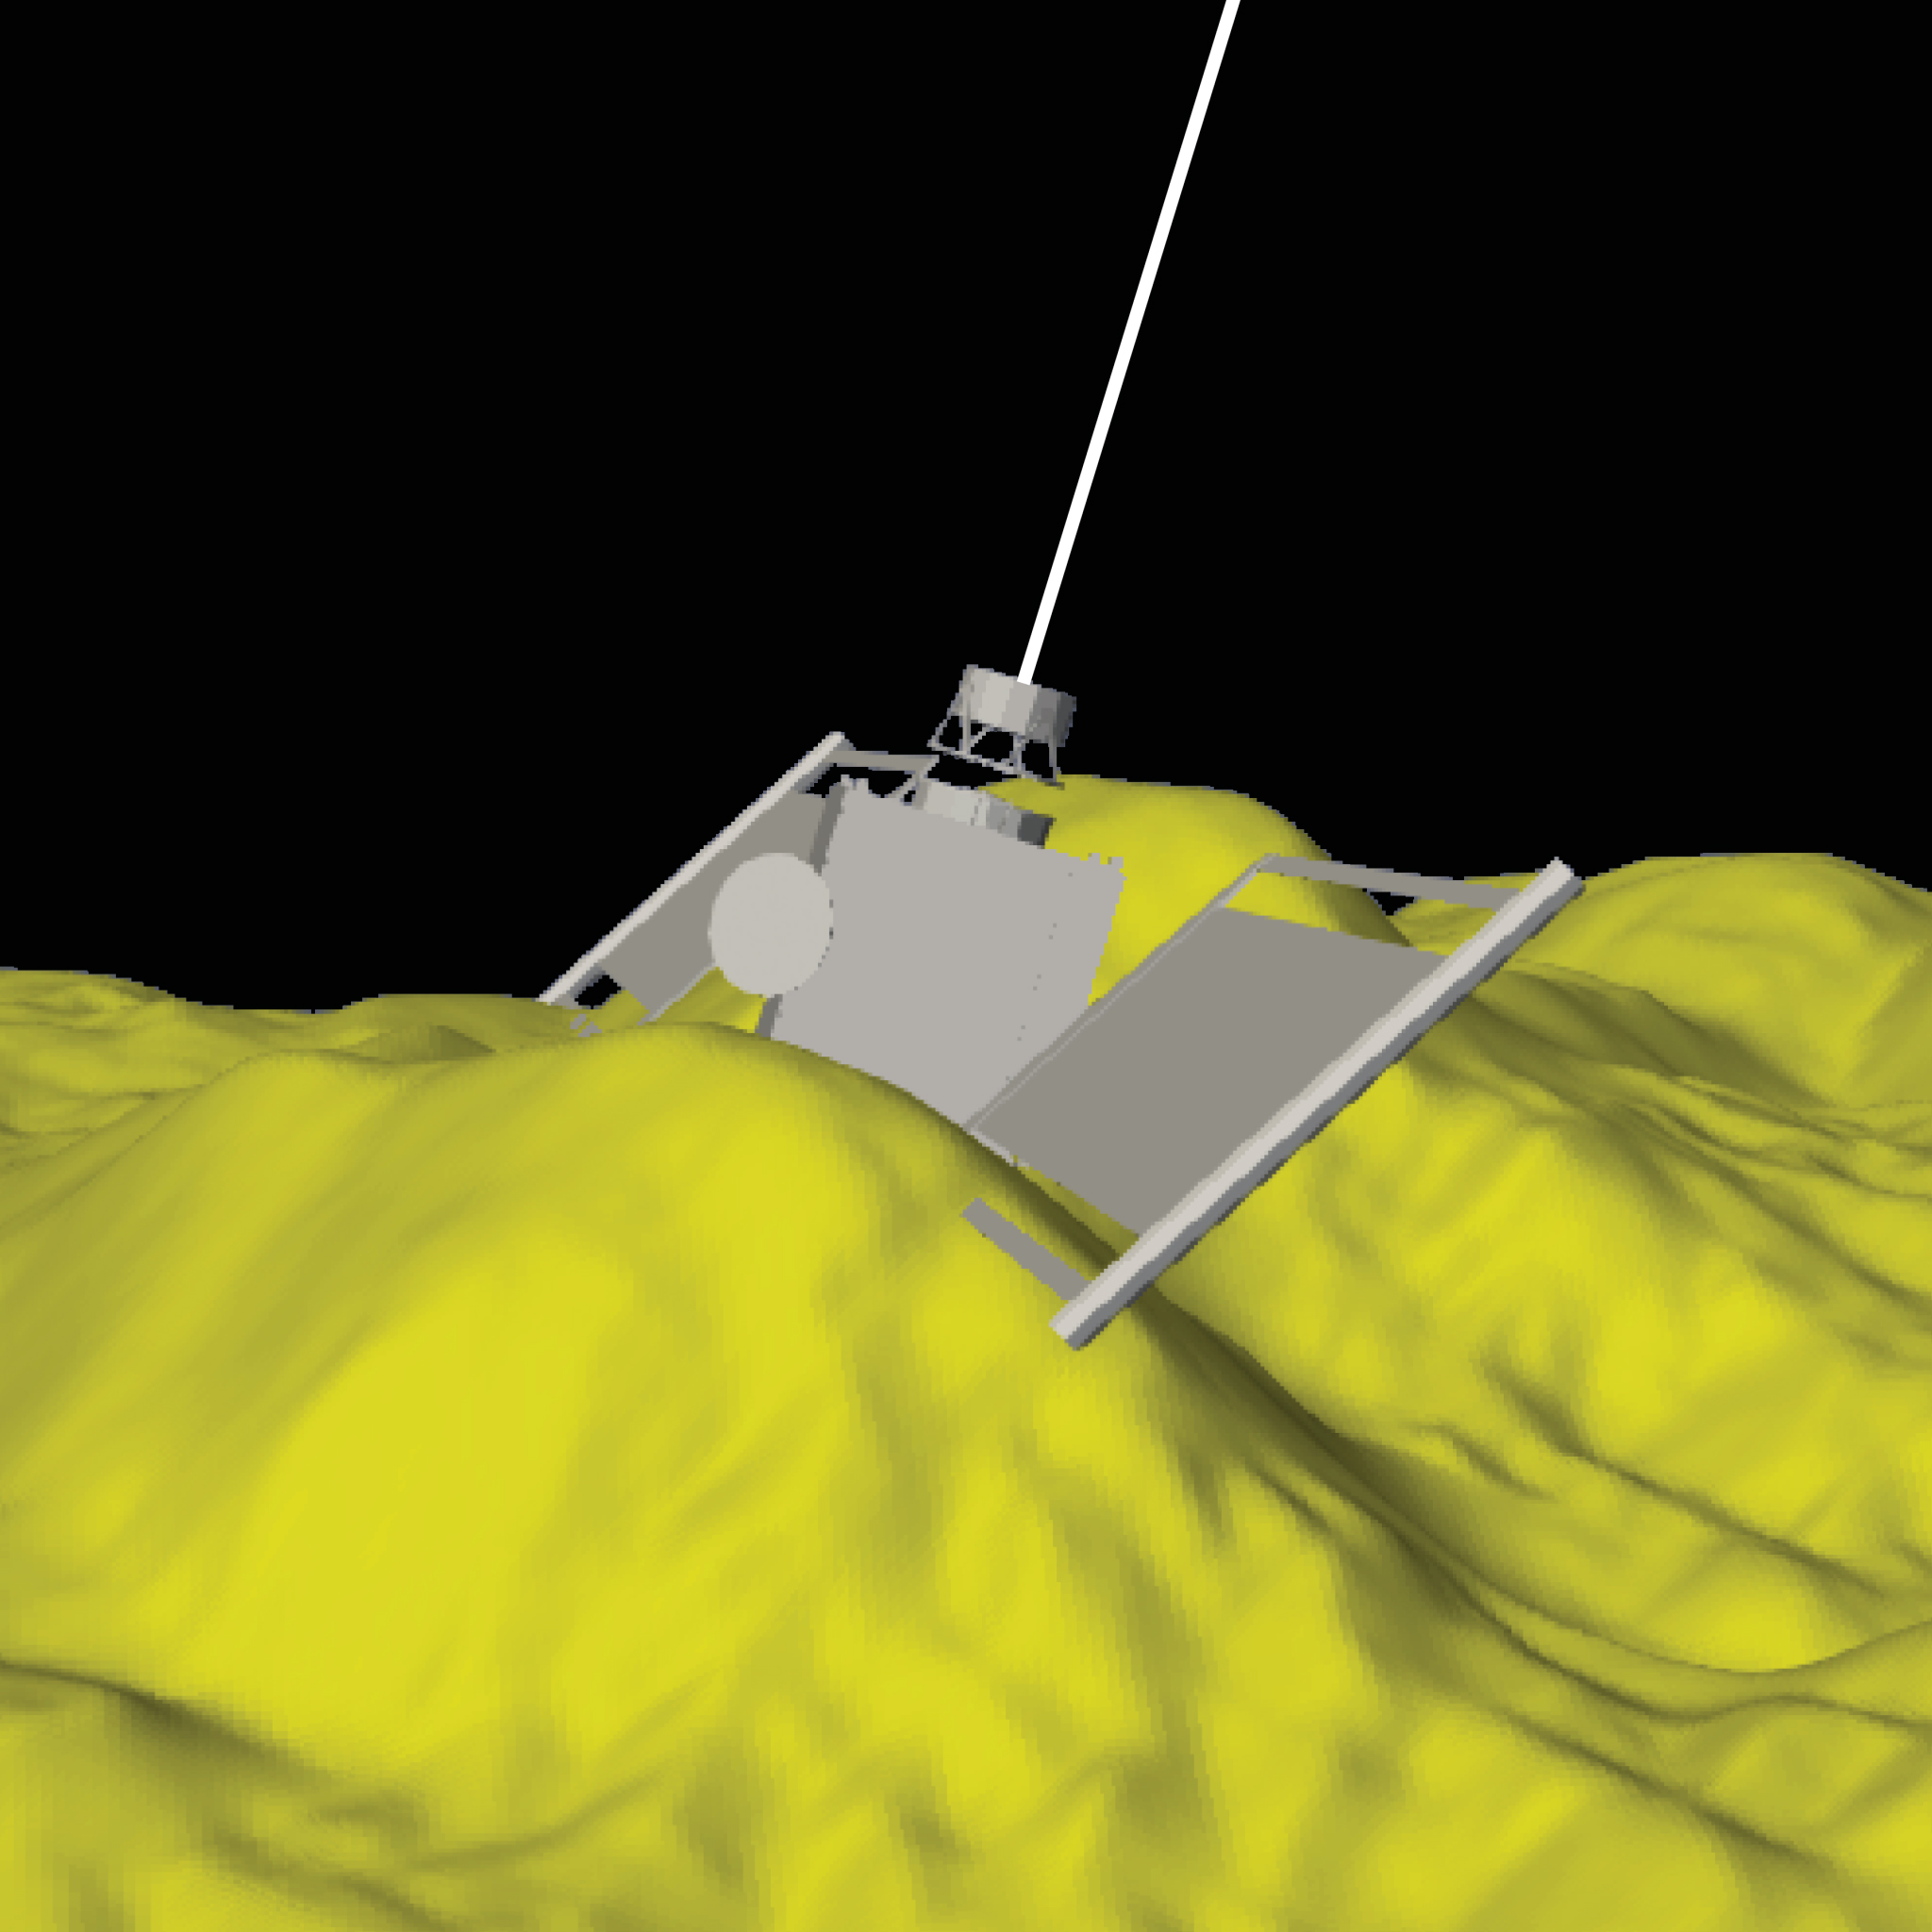 The yellow surface is a digital terrain model of the impact site made from DART images, and the rendering of the DART spacecraft depicts its position a few tens of microseconds before impact. The white line extending from the back of the spacecraft shows the spacecraft’s trajectory.